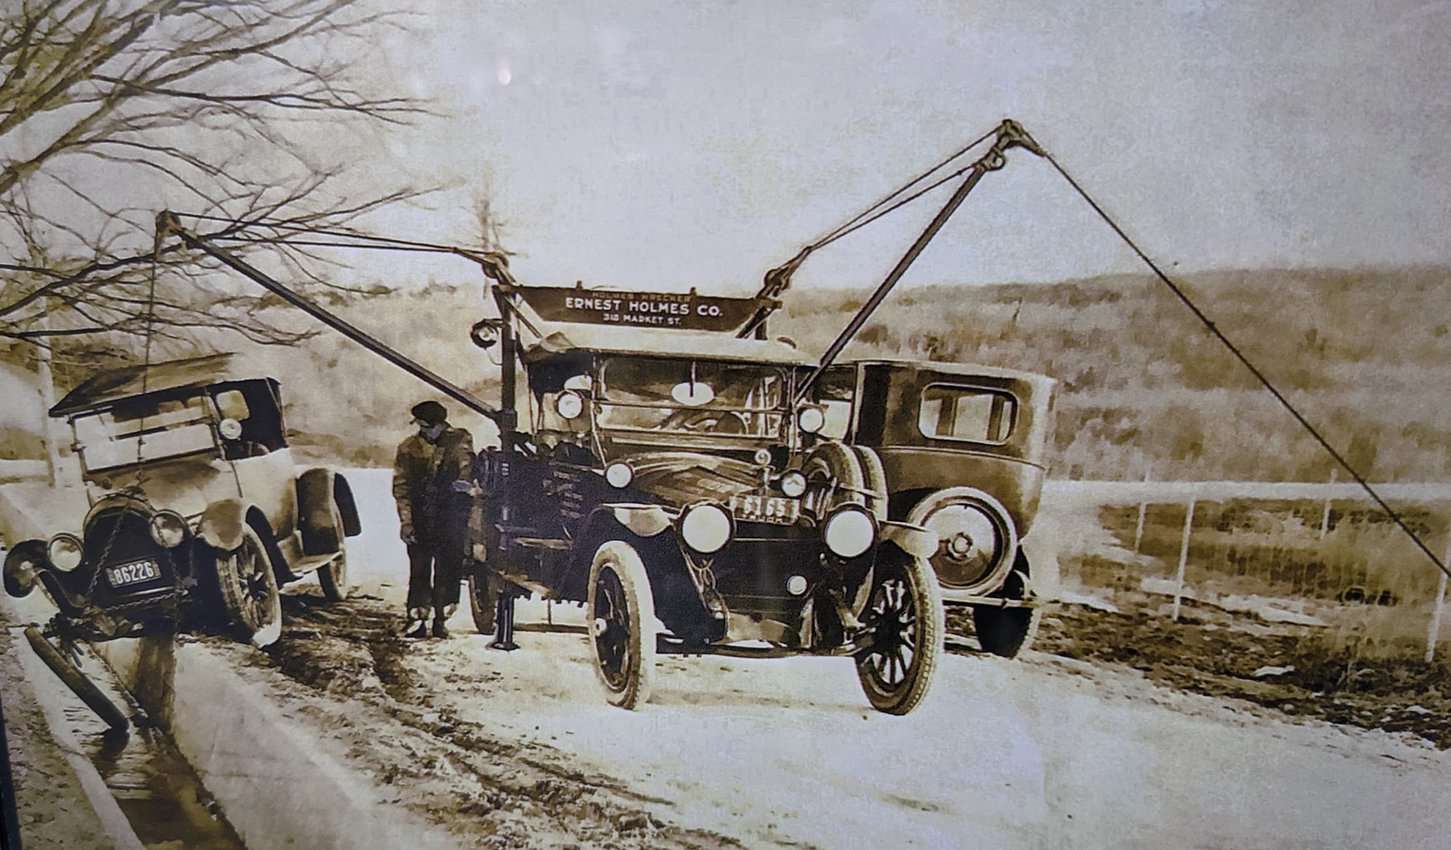 An early tow truck. on display at the Towing Museum